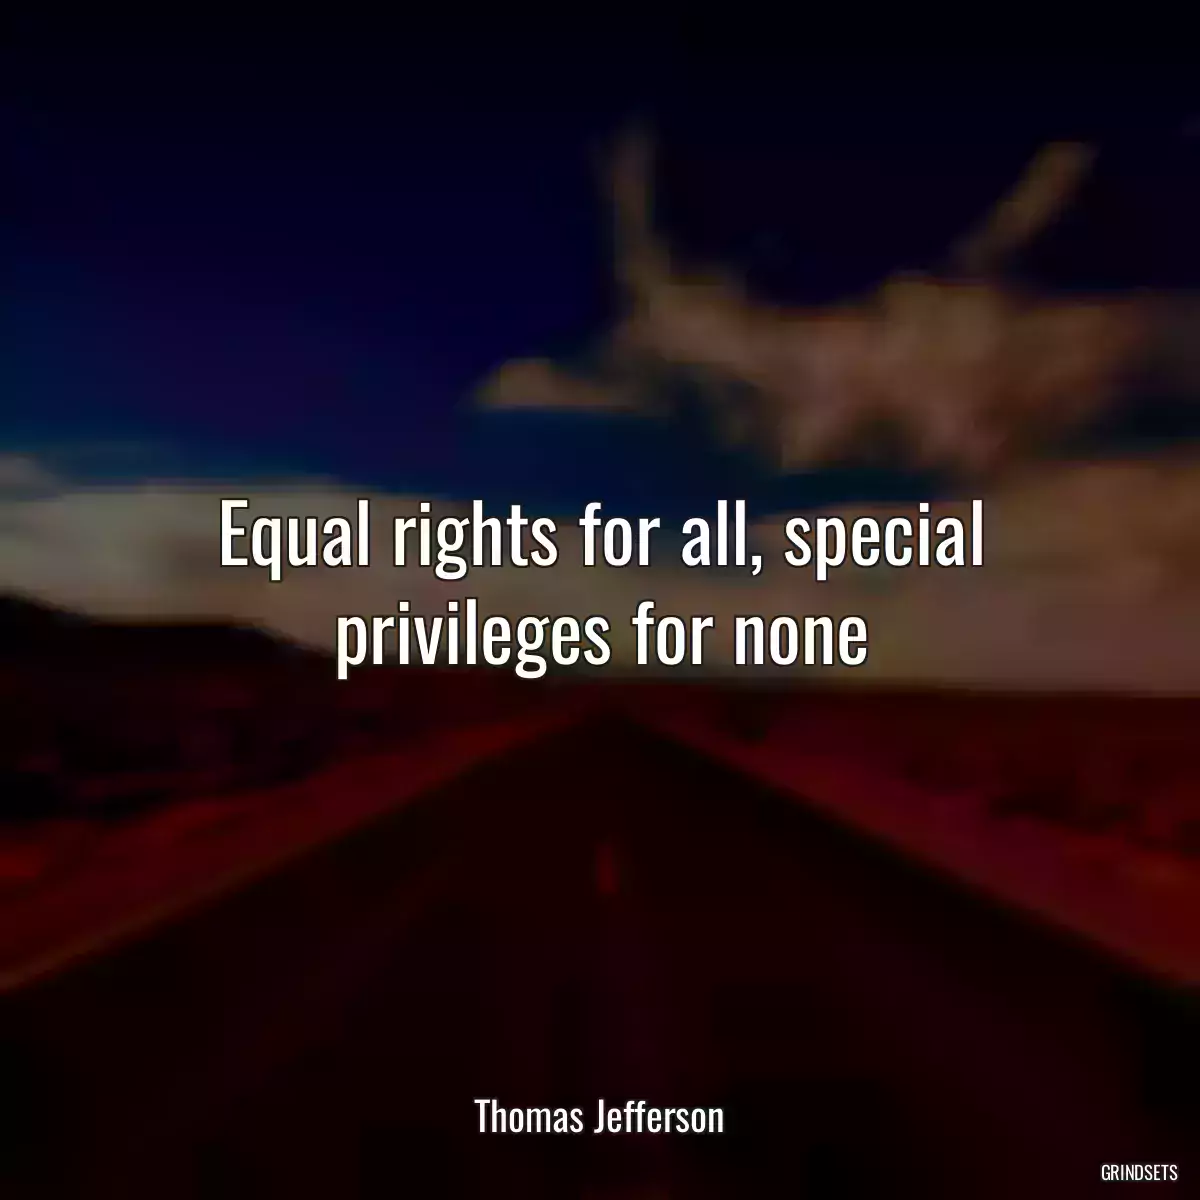 Equal rights for all, special privileges for none